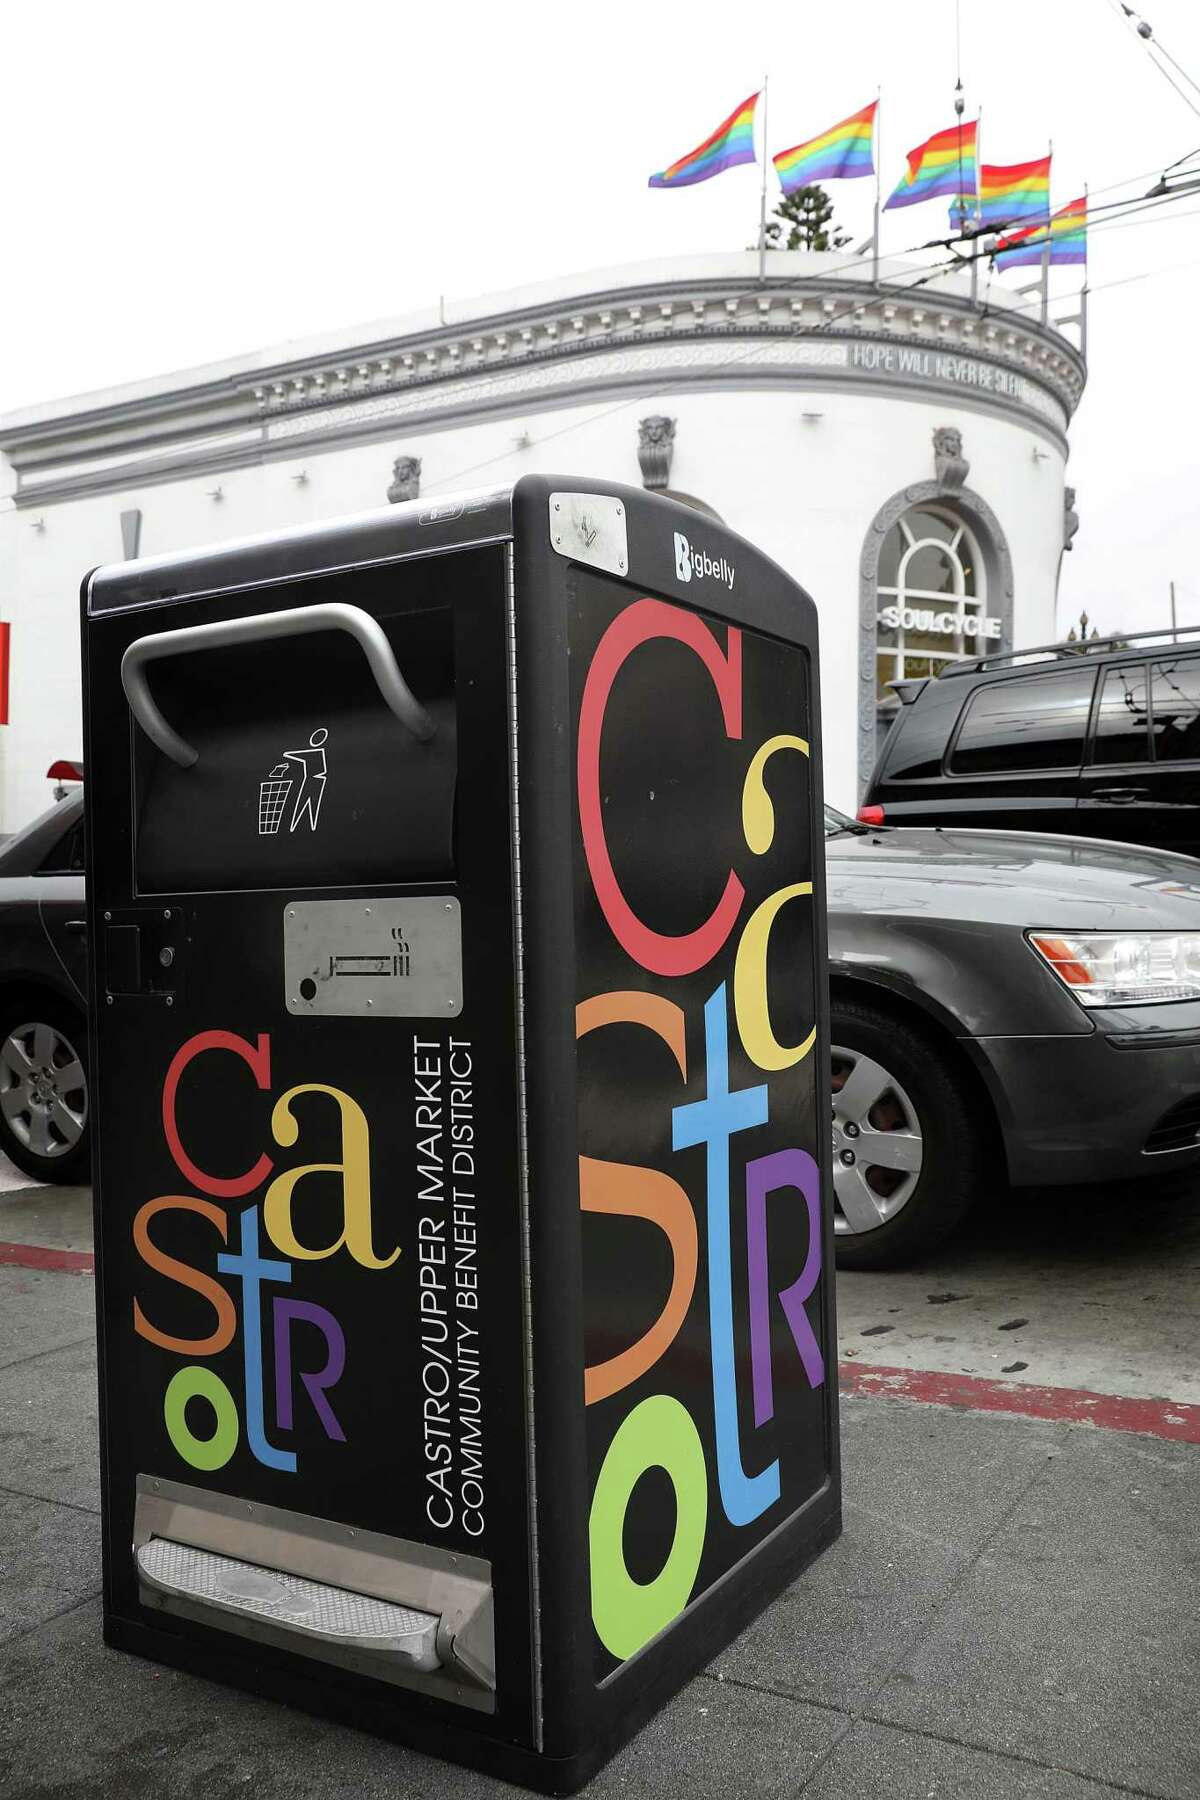 View of the new Bigbelly garbage can seen on Castro Street on Monday, Aug. 13, 2018 in San Francisco, Calif.